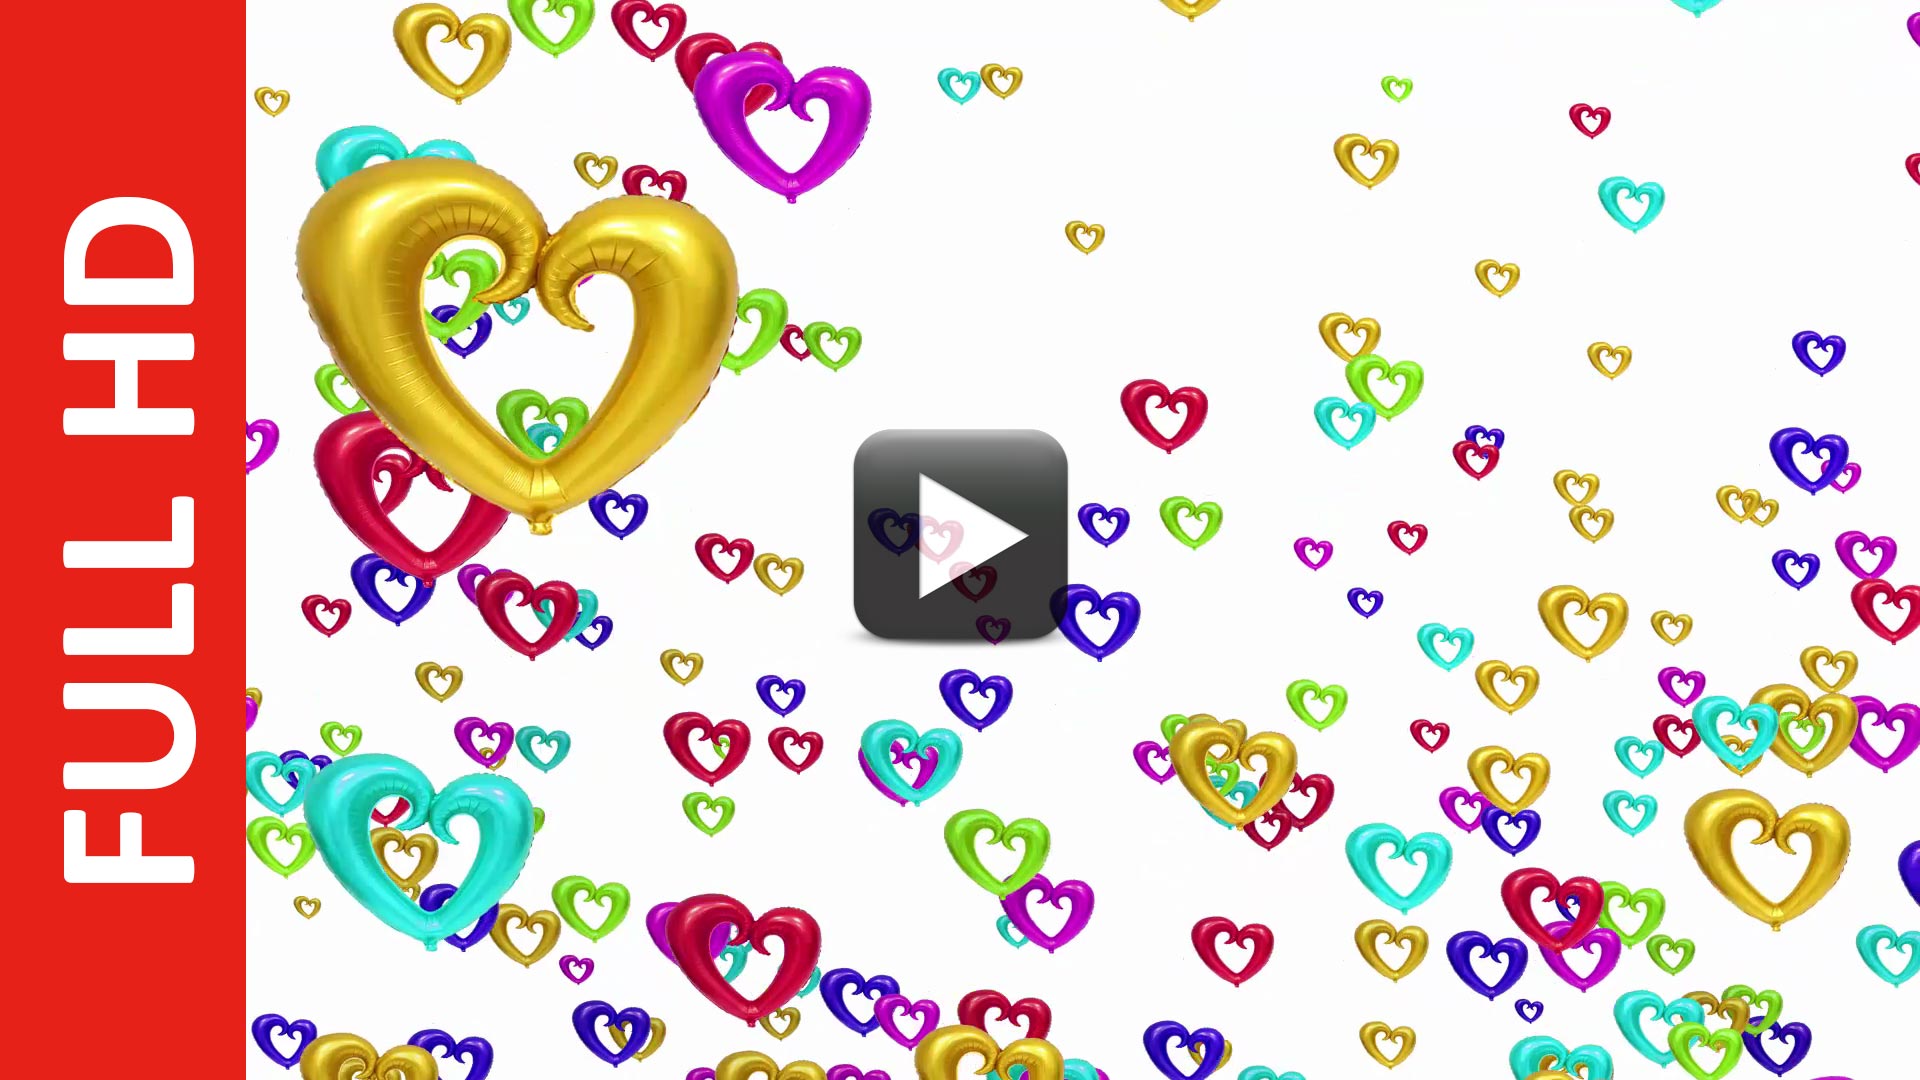 Love Heart Color Change Animation White Background | All Design Creative